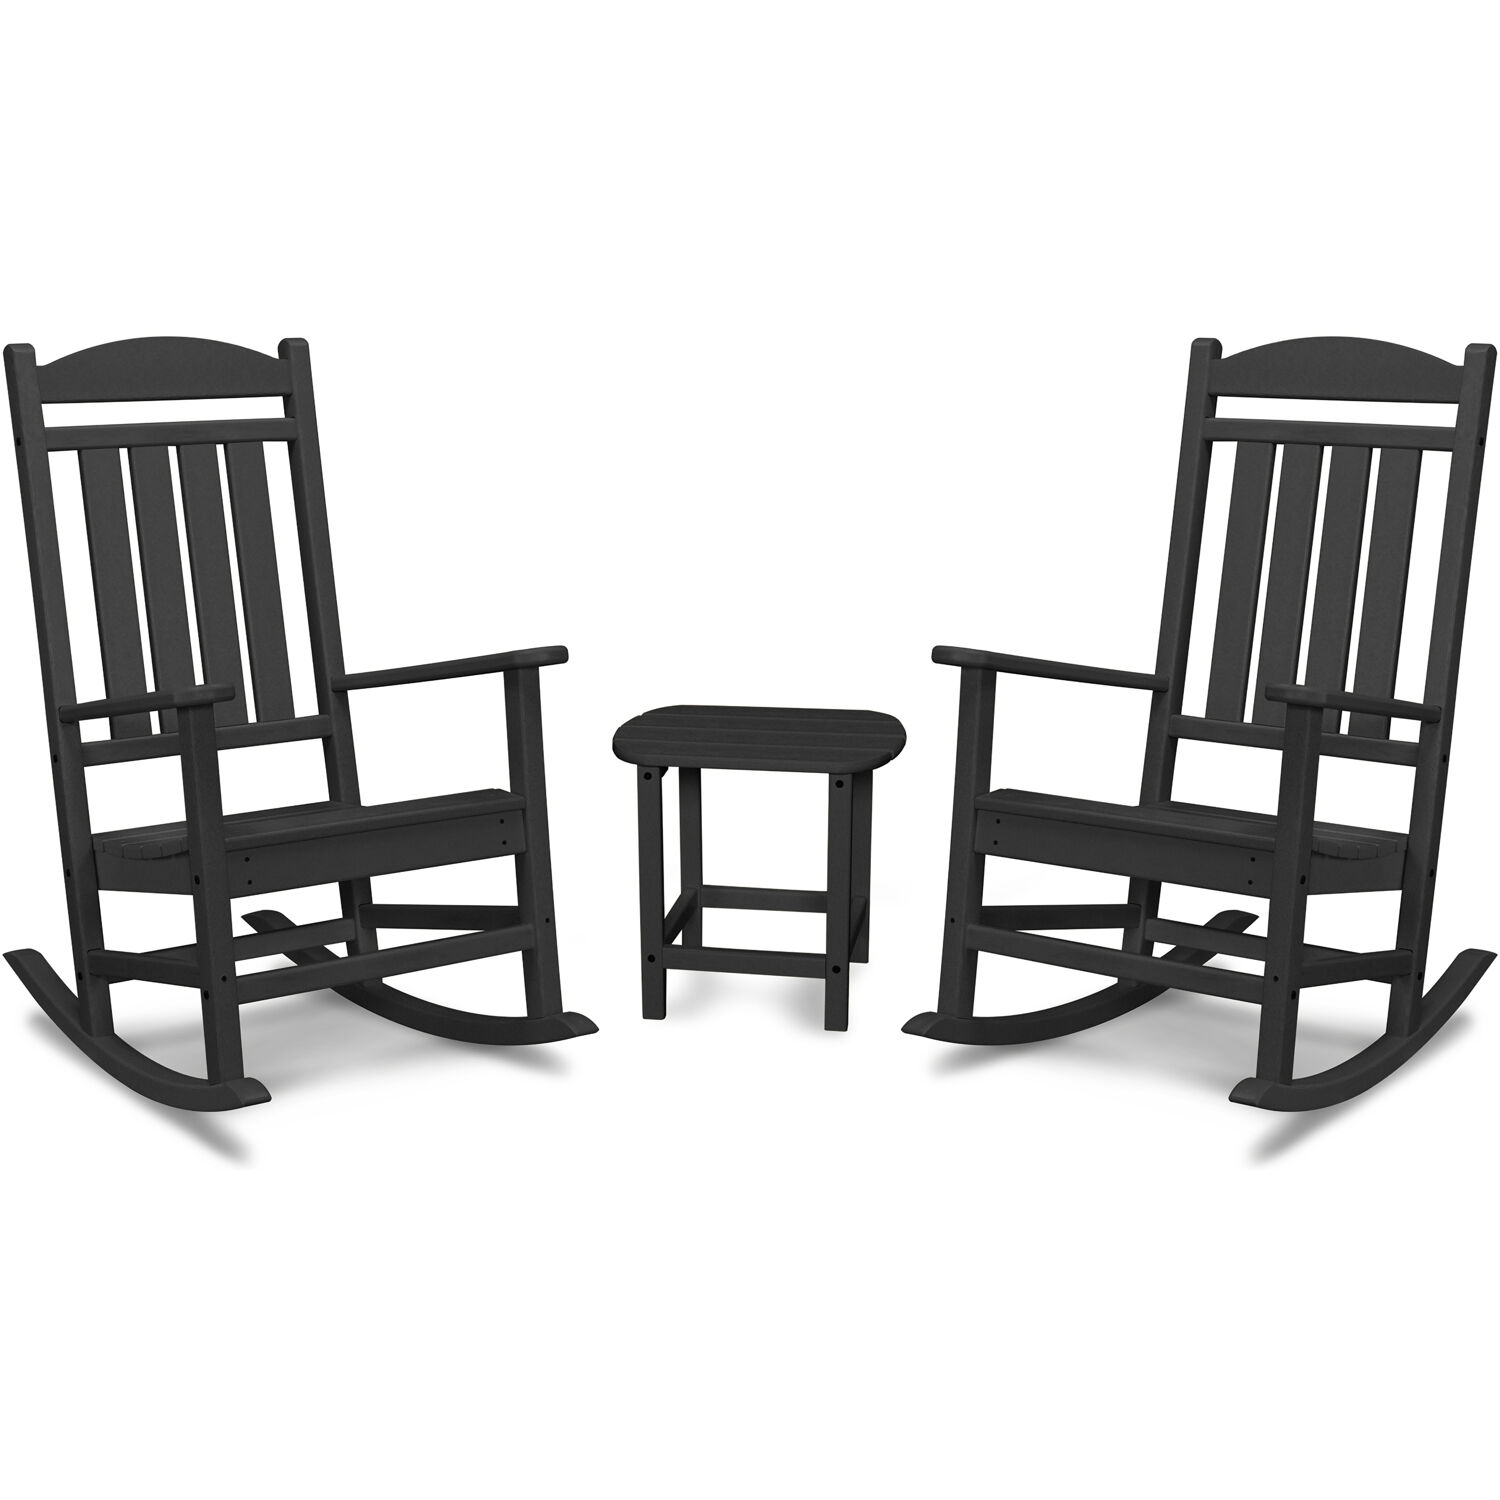 Hanover Pineapple Cay All-Weather 3-Piece Outdoor Patio Porch Rocker Chat Set, 2 Rockers and Side Table, Eco-Friendly, Recycled Material, Made in USA - PINE3PC-BLK - image 1 of 4